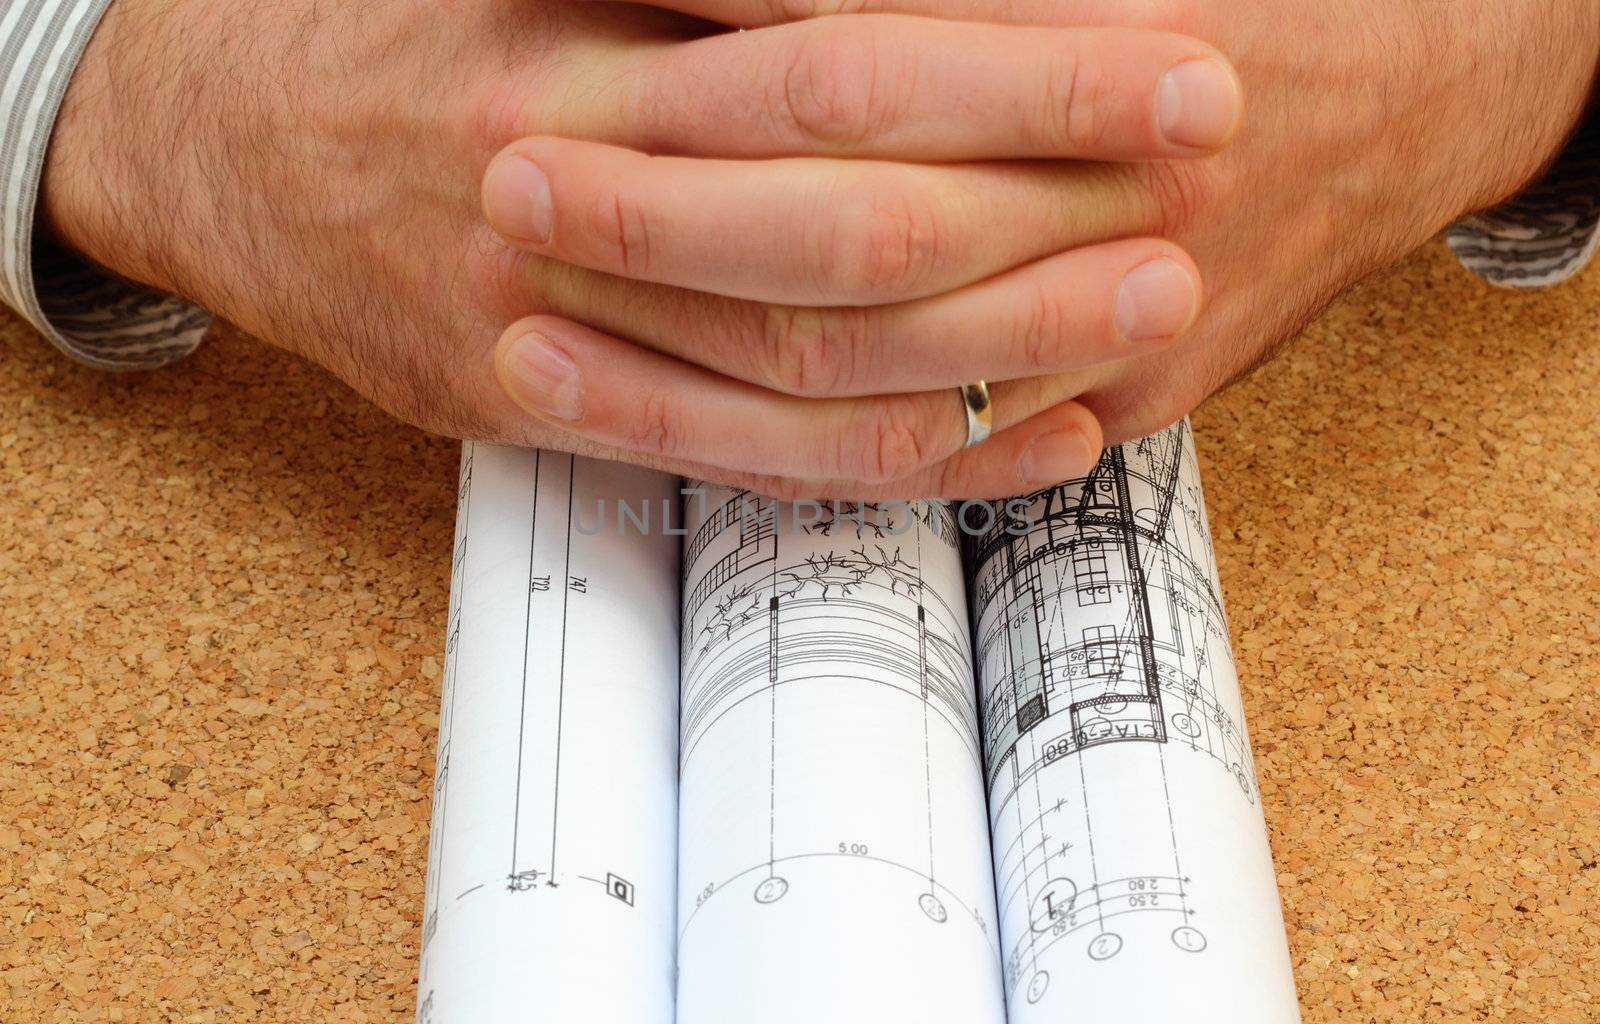 human hands over architectural work - rolled blueprints over the office